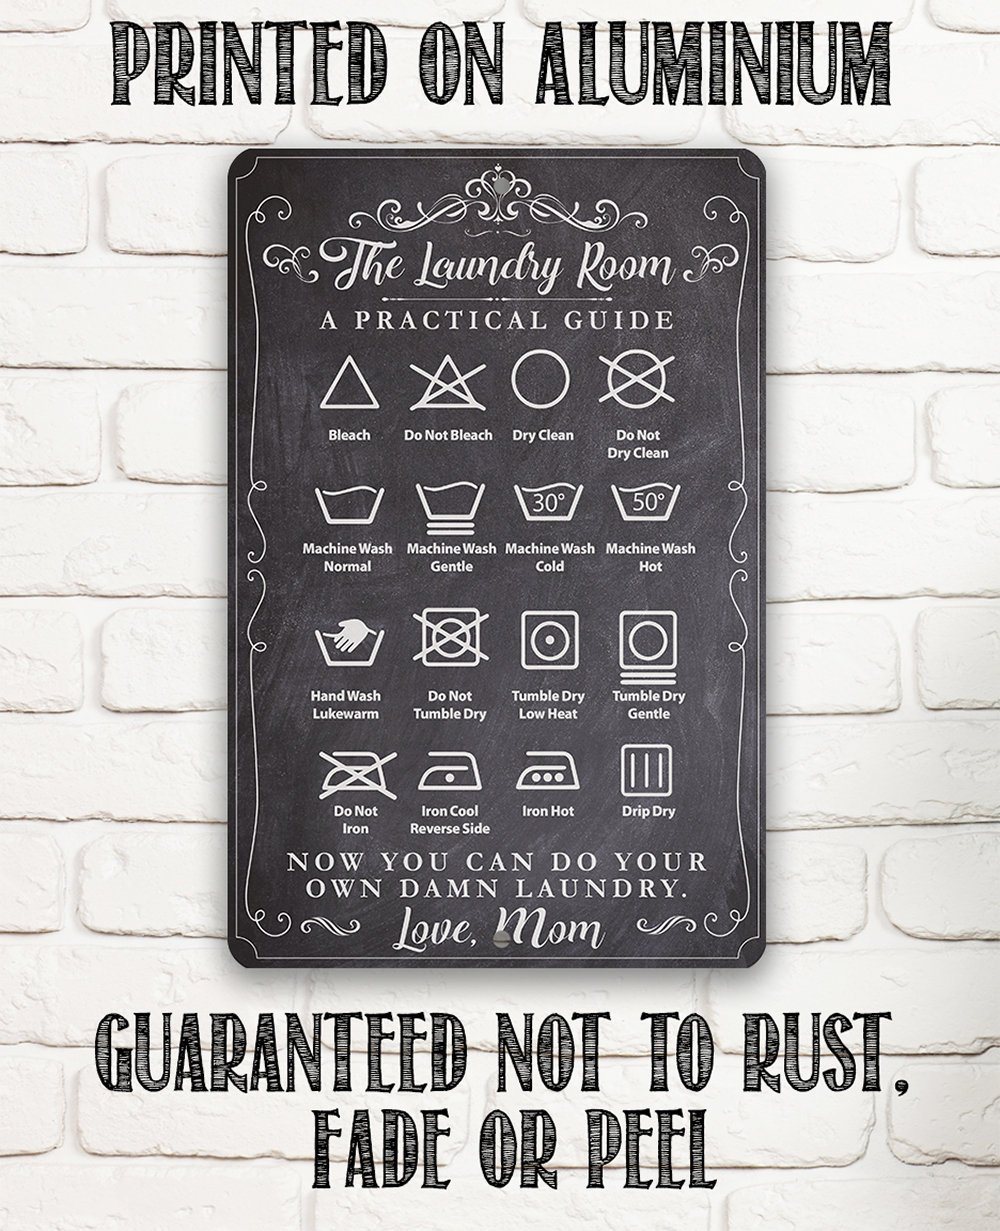 The Laundry Room A Practical Guide - Metal Sign | Lone Star Art.